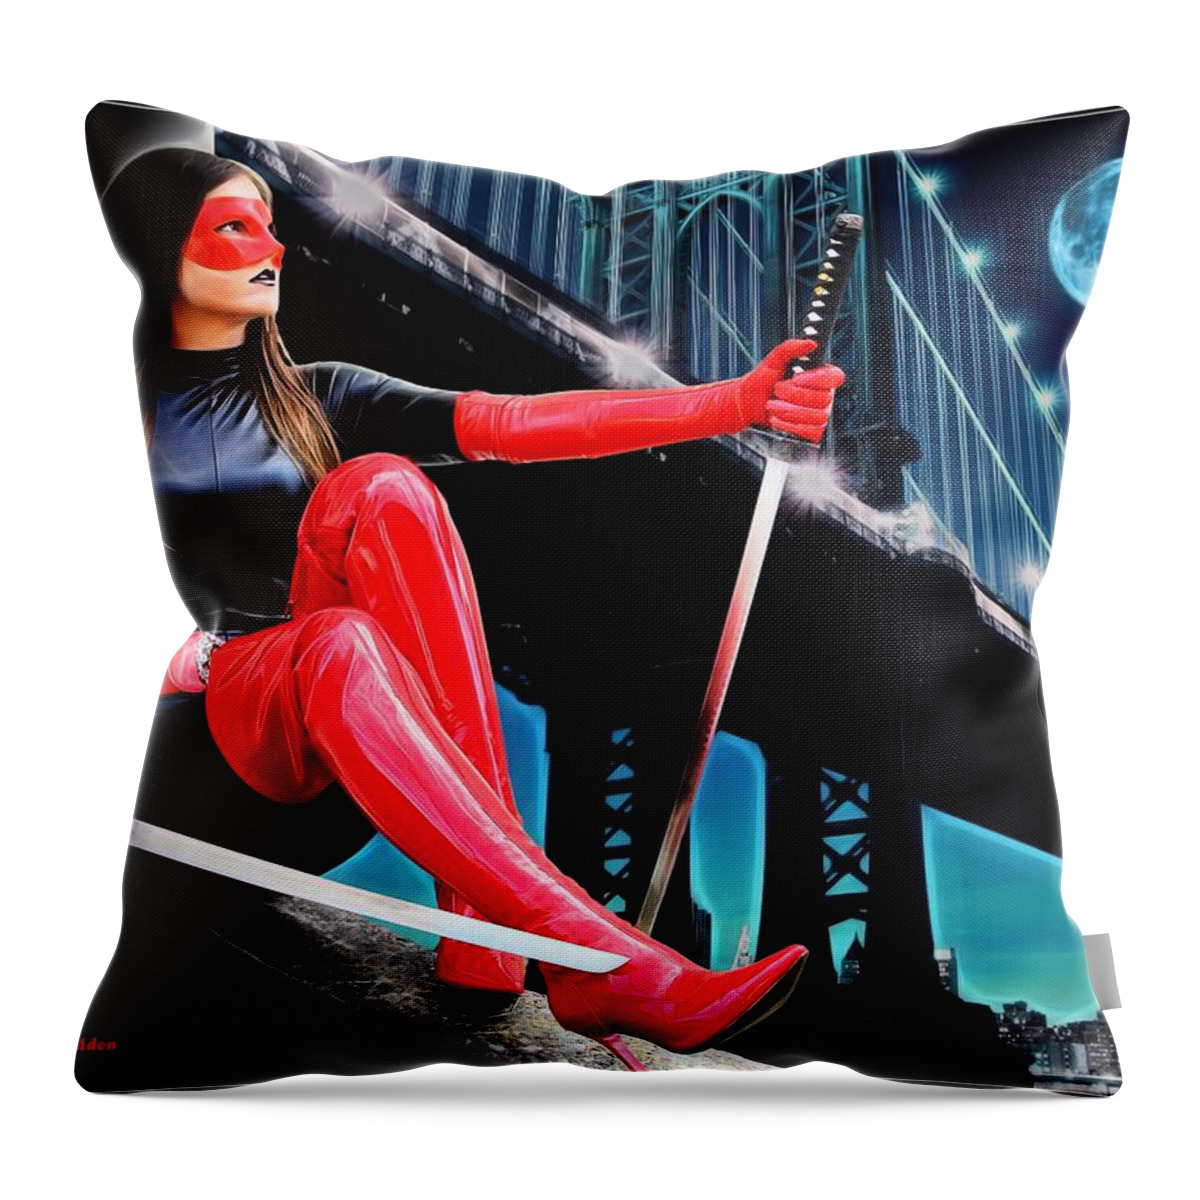 Fantasy Throw Pillow featuring the painting Hero At Rest by Jon Volden